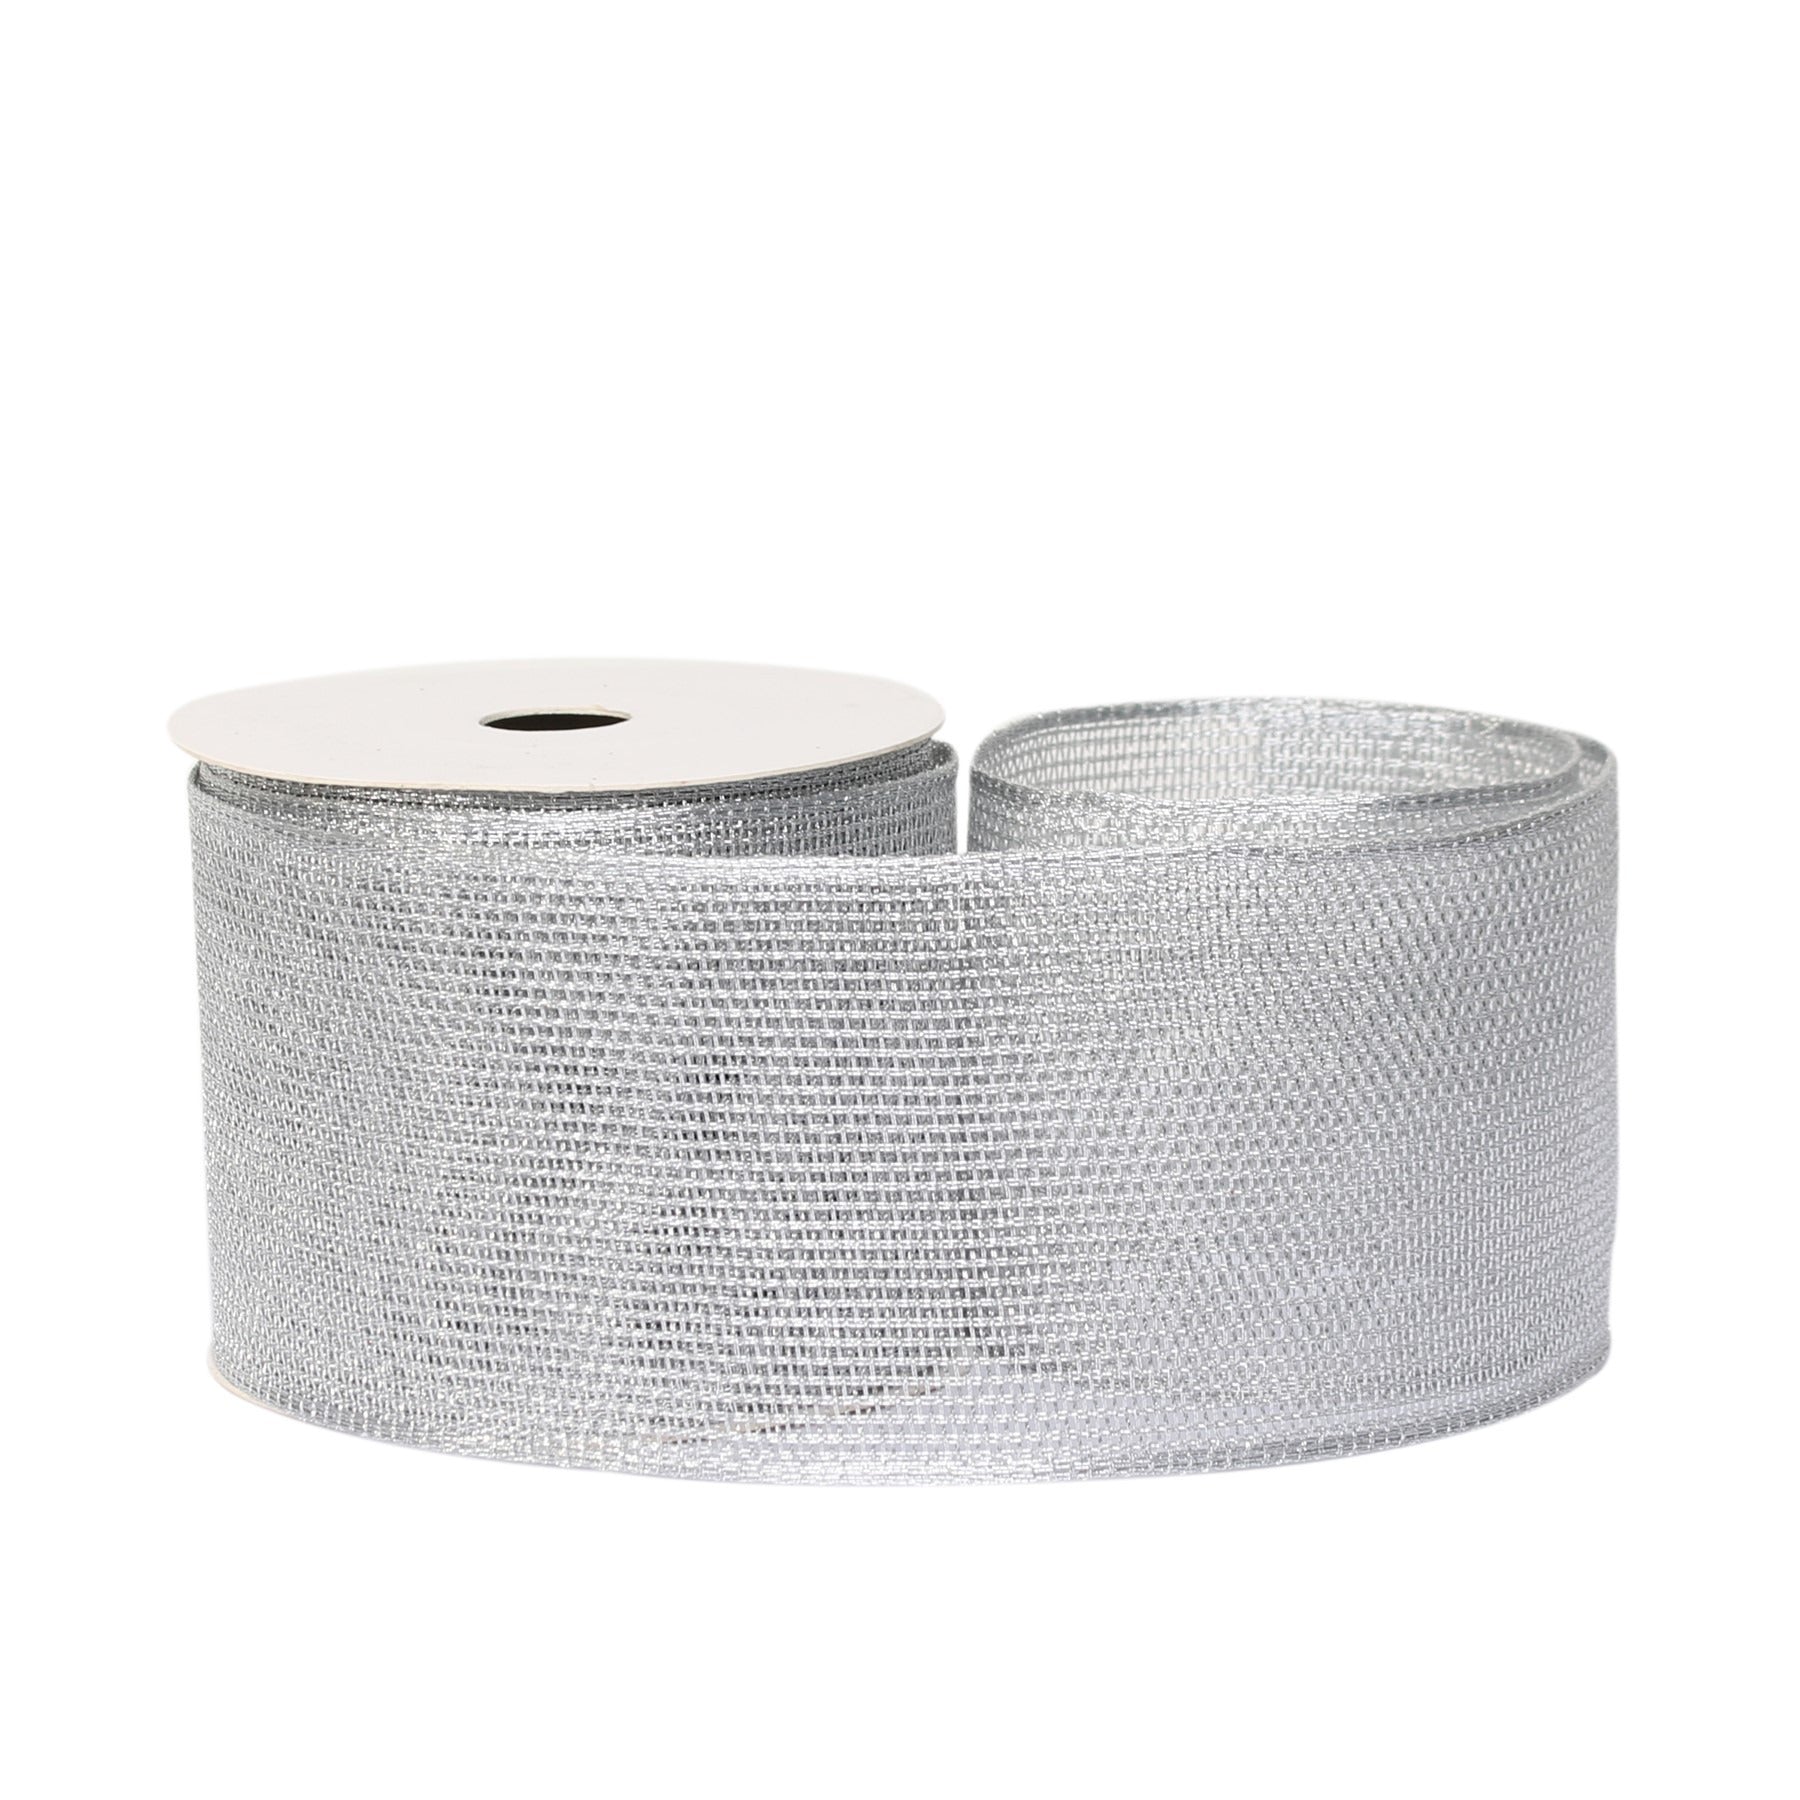 View Mesh ribbon 63mm x 10 yards wire edge Silver information